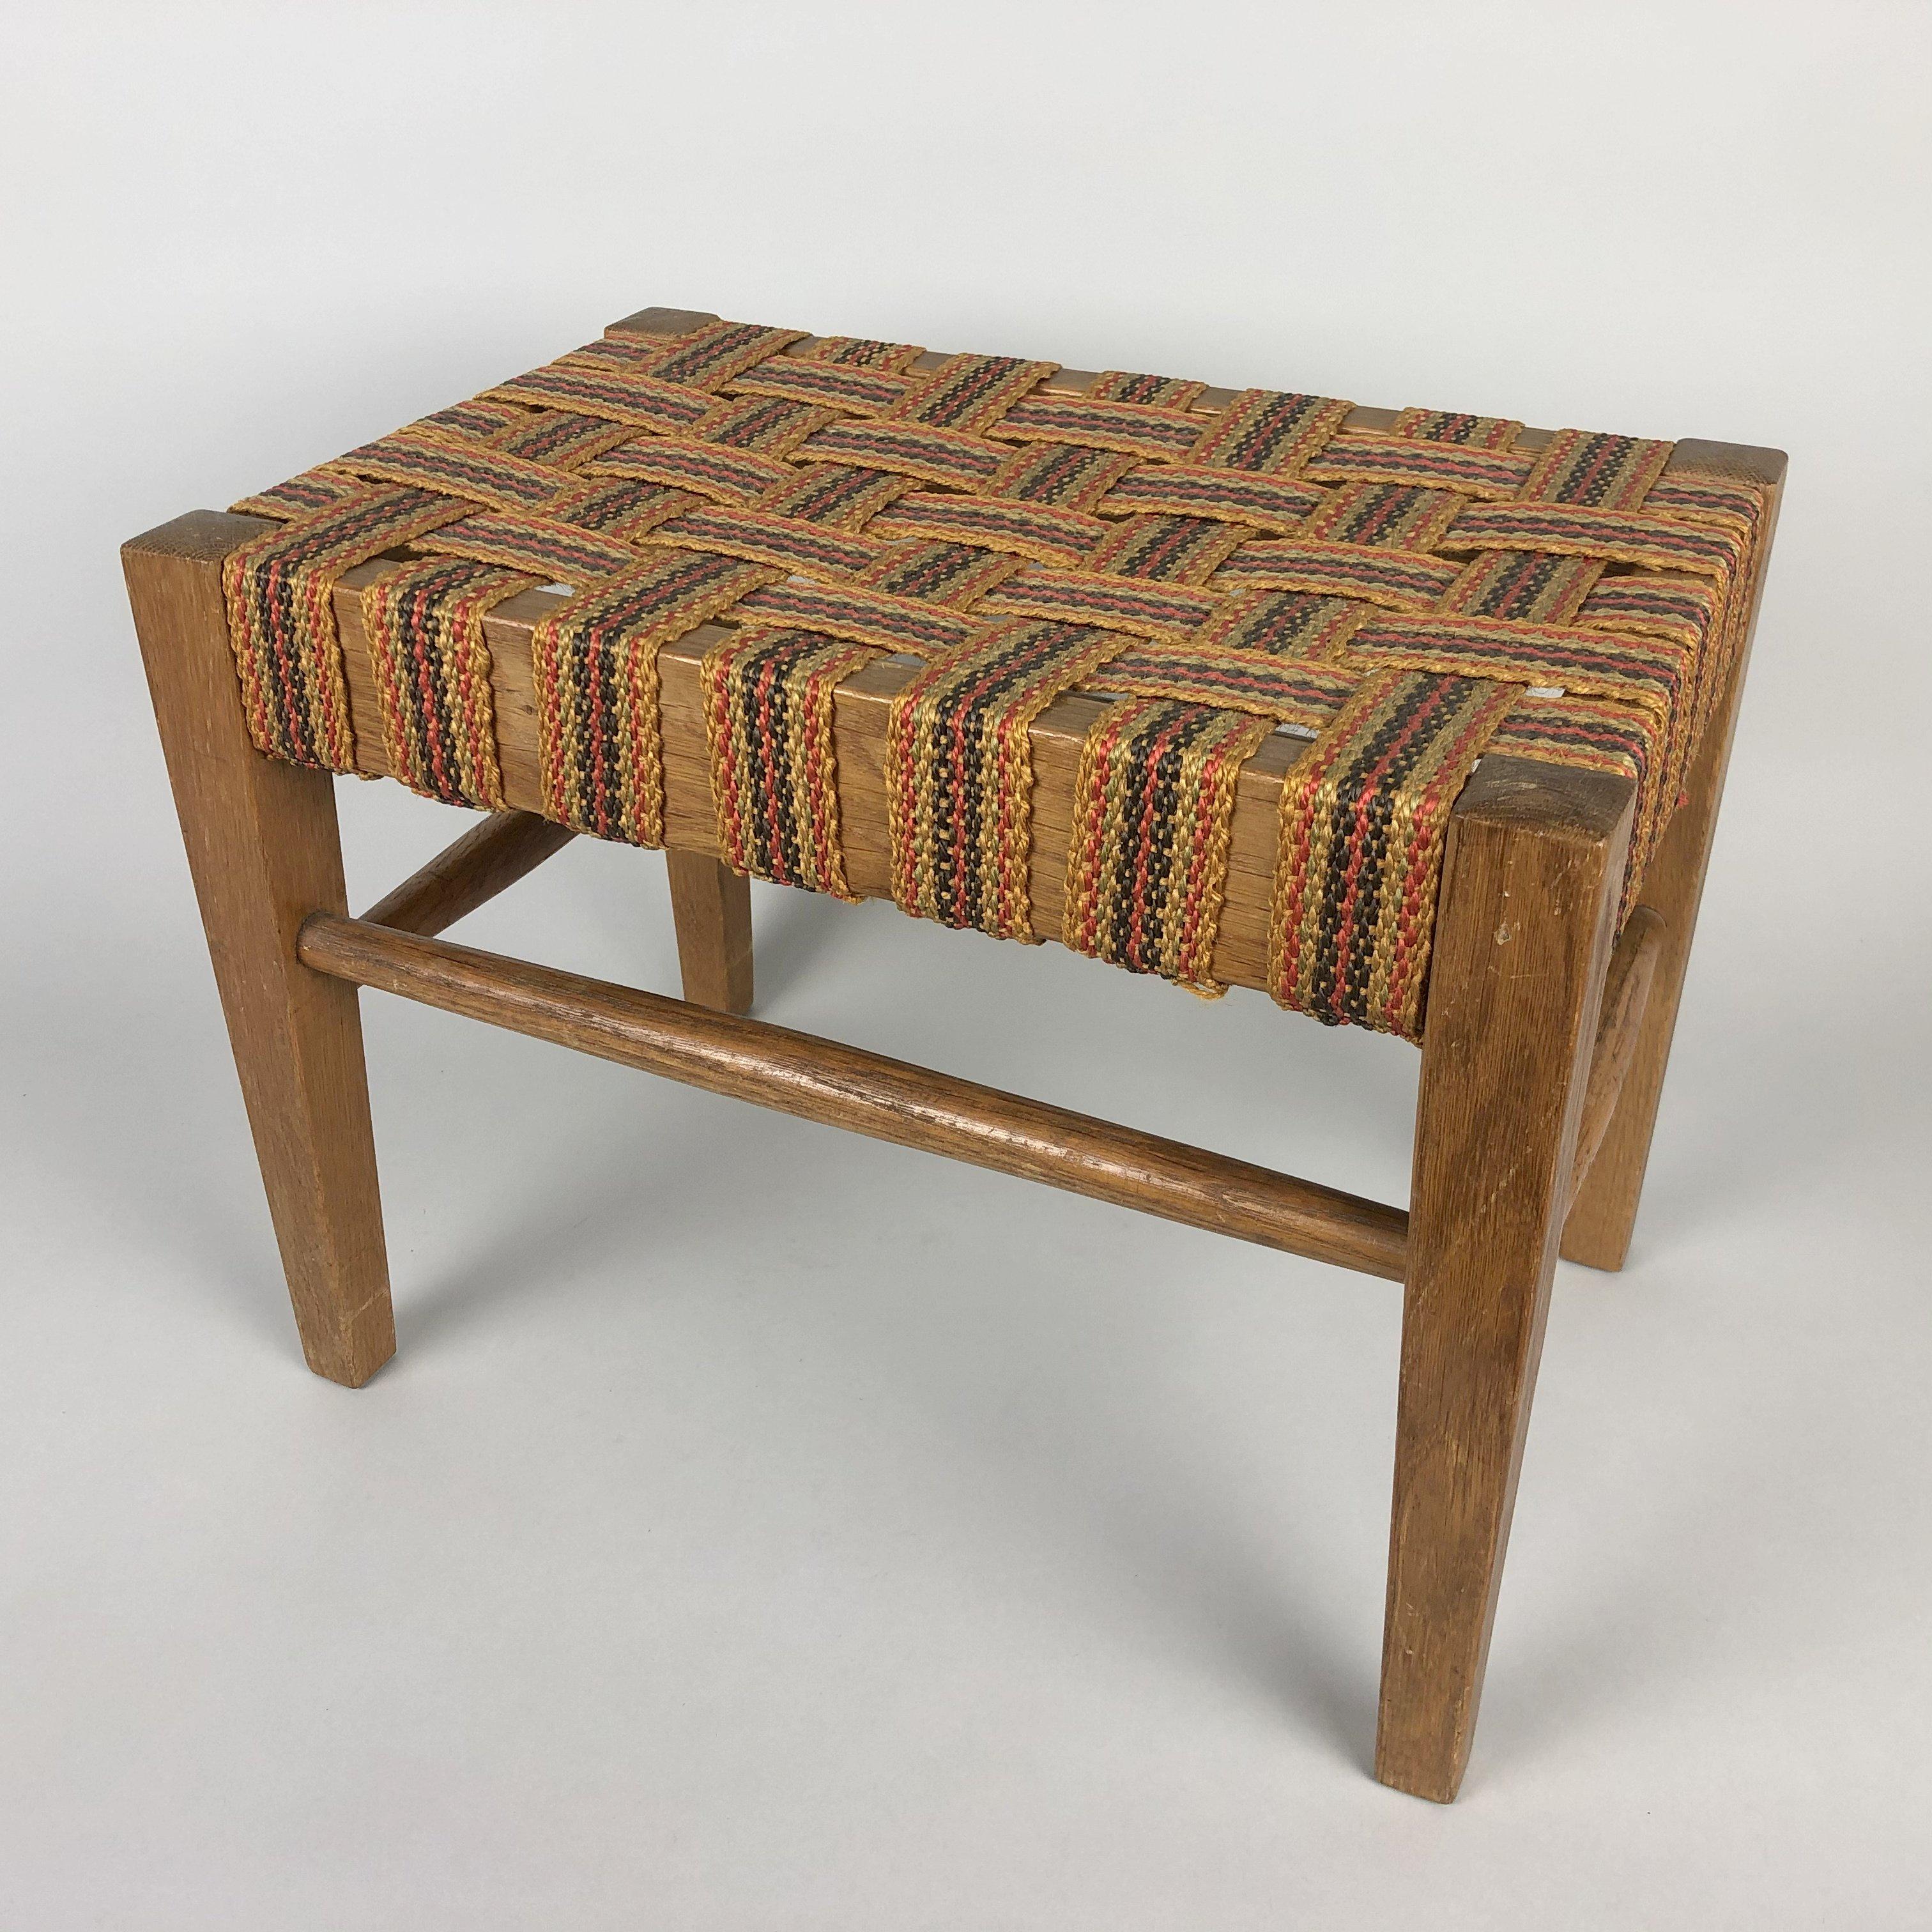 Midcentury small stool made of wood and fabric. Original well preserved condition.